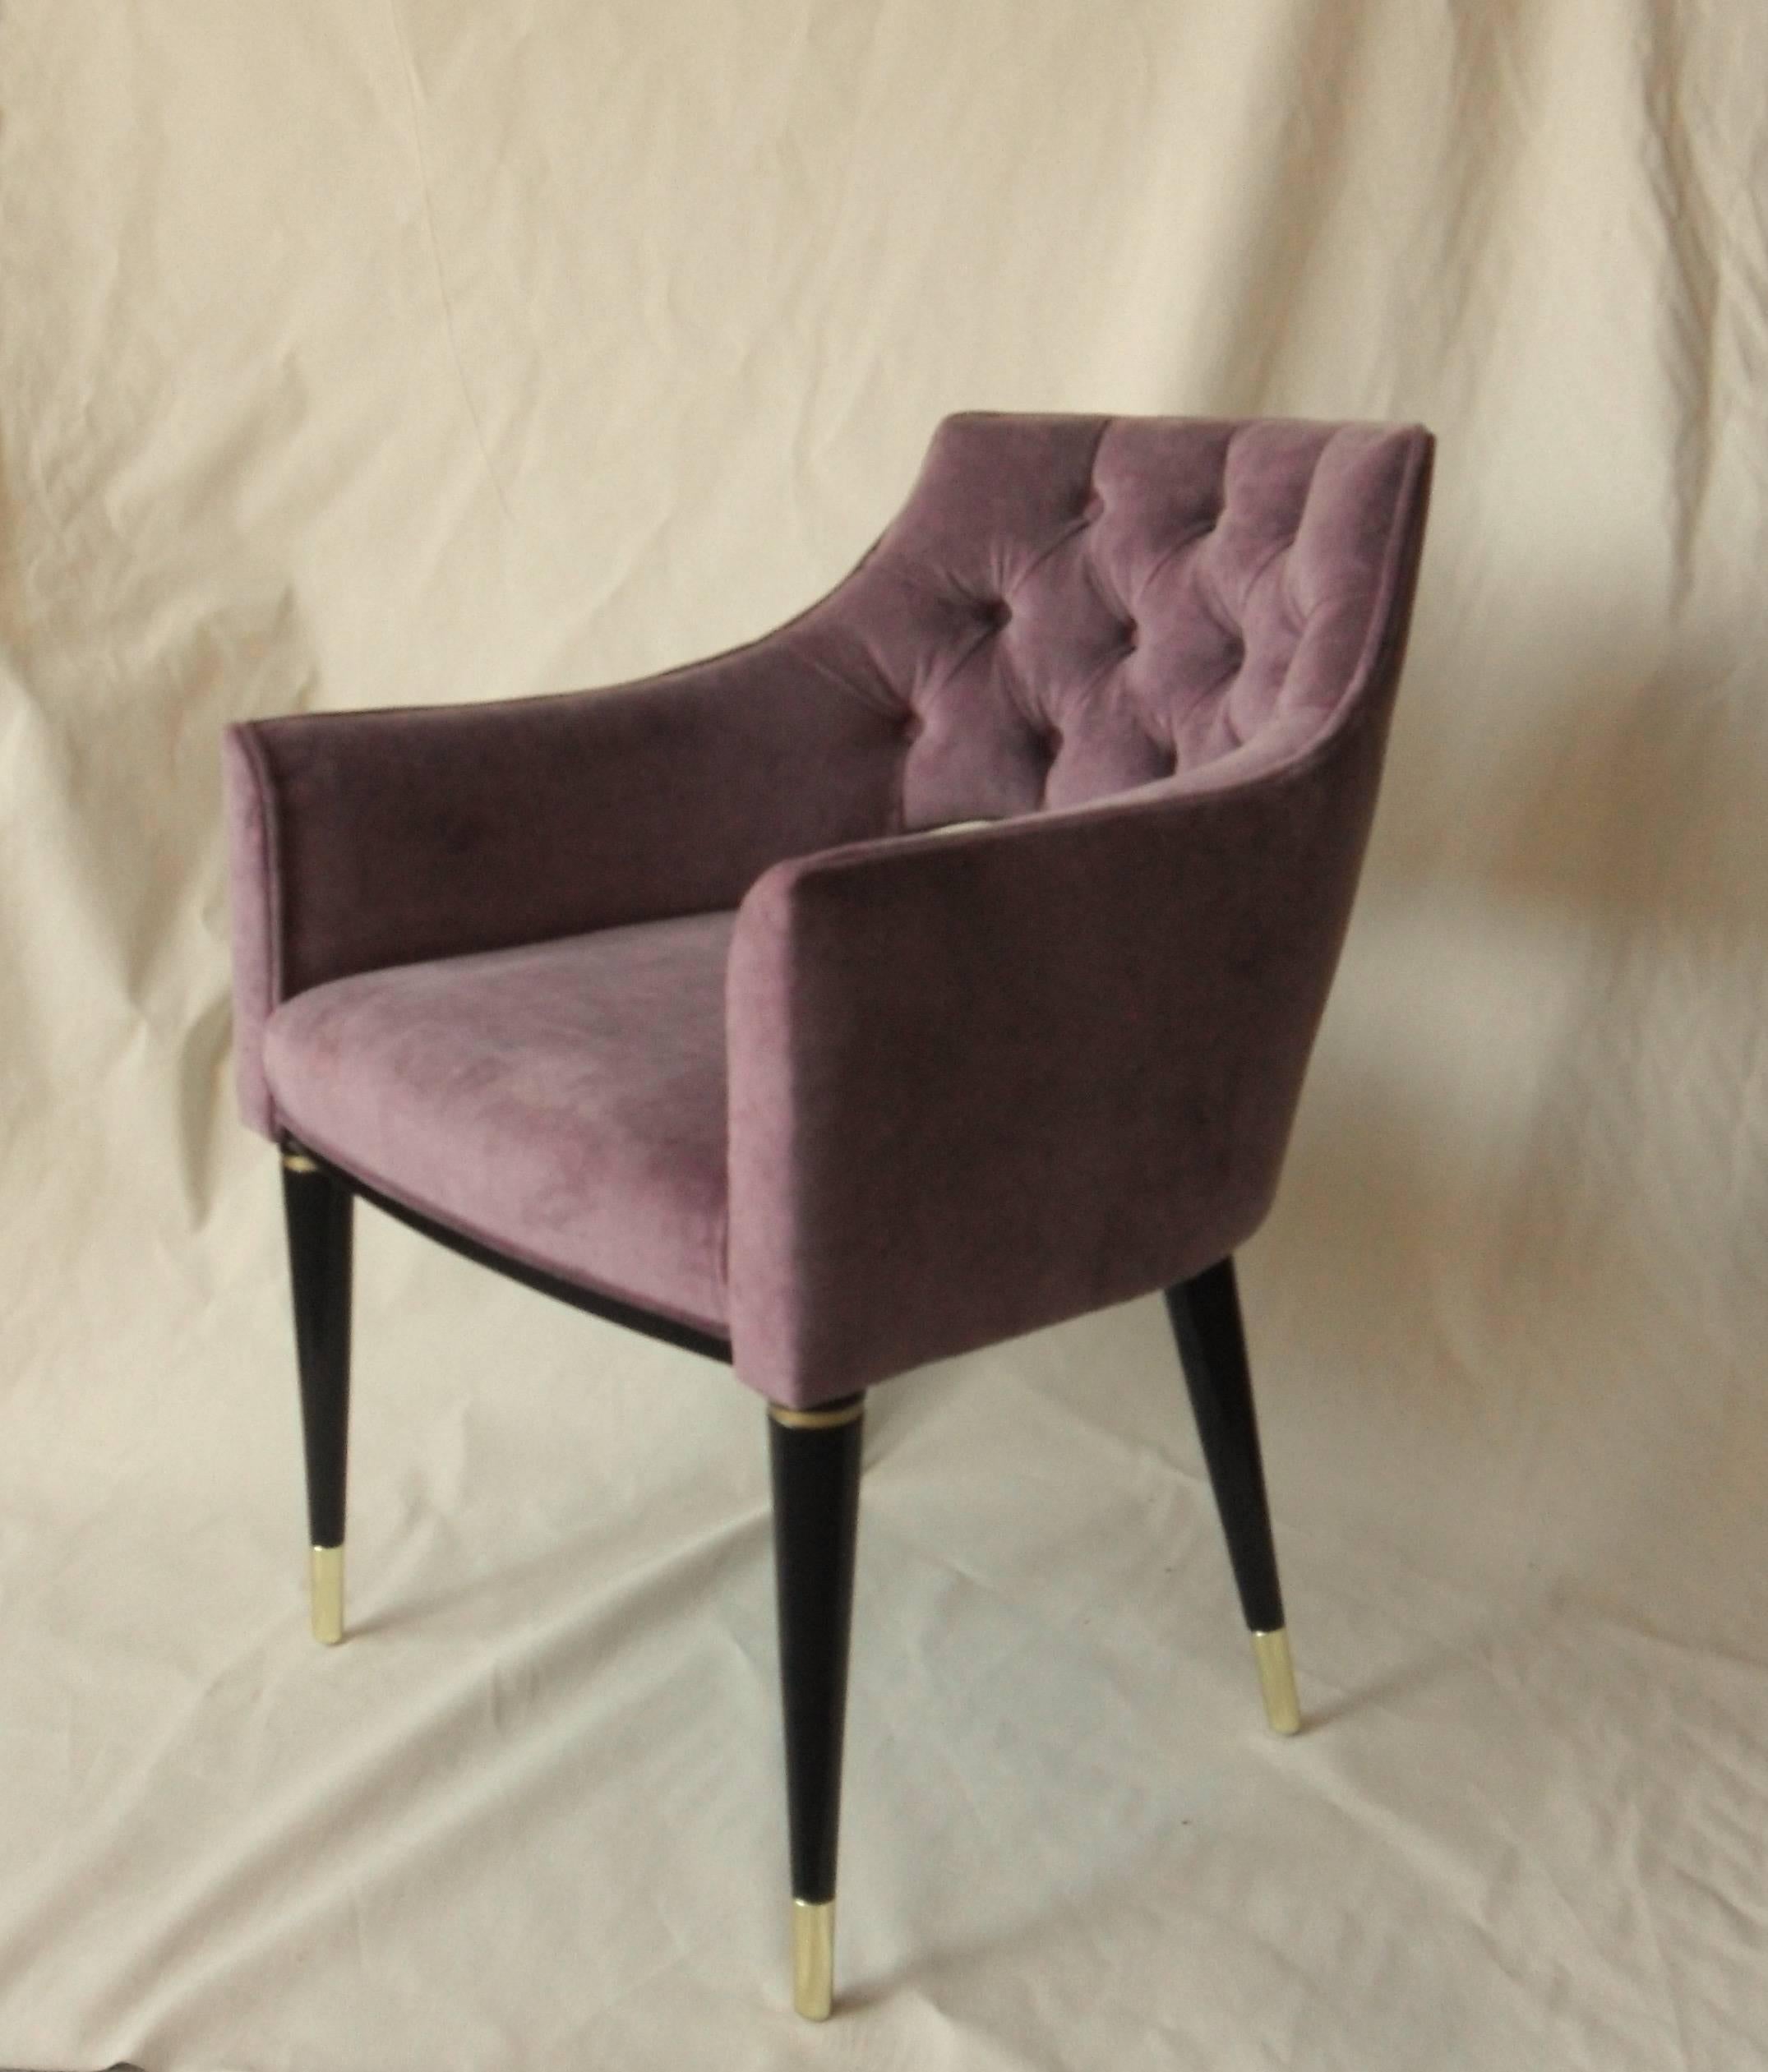 Superb midcentury chair. Set of ten made with beautiful deep English rose velvet. 

Restauration grade finishing and upholstering. Metal ring and fittings.
Extremely comfortable and chic.
Tuscan woven cotton 50% and polyester 50%. Martindale